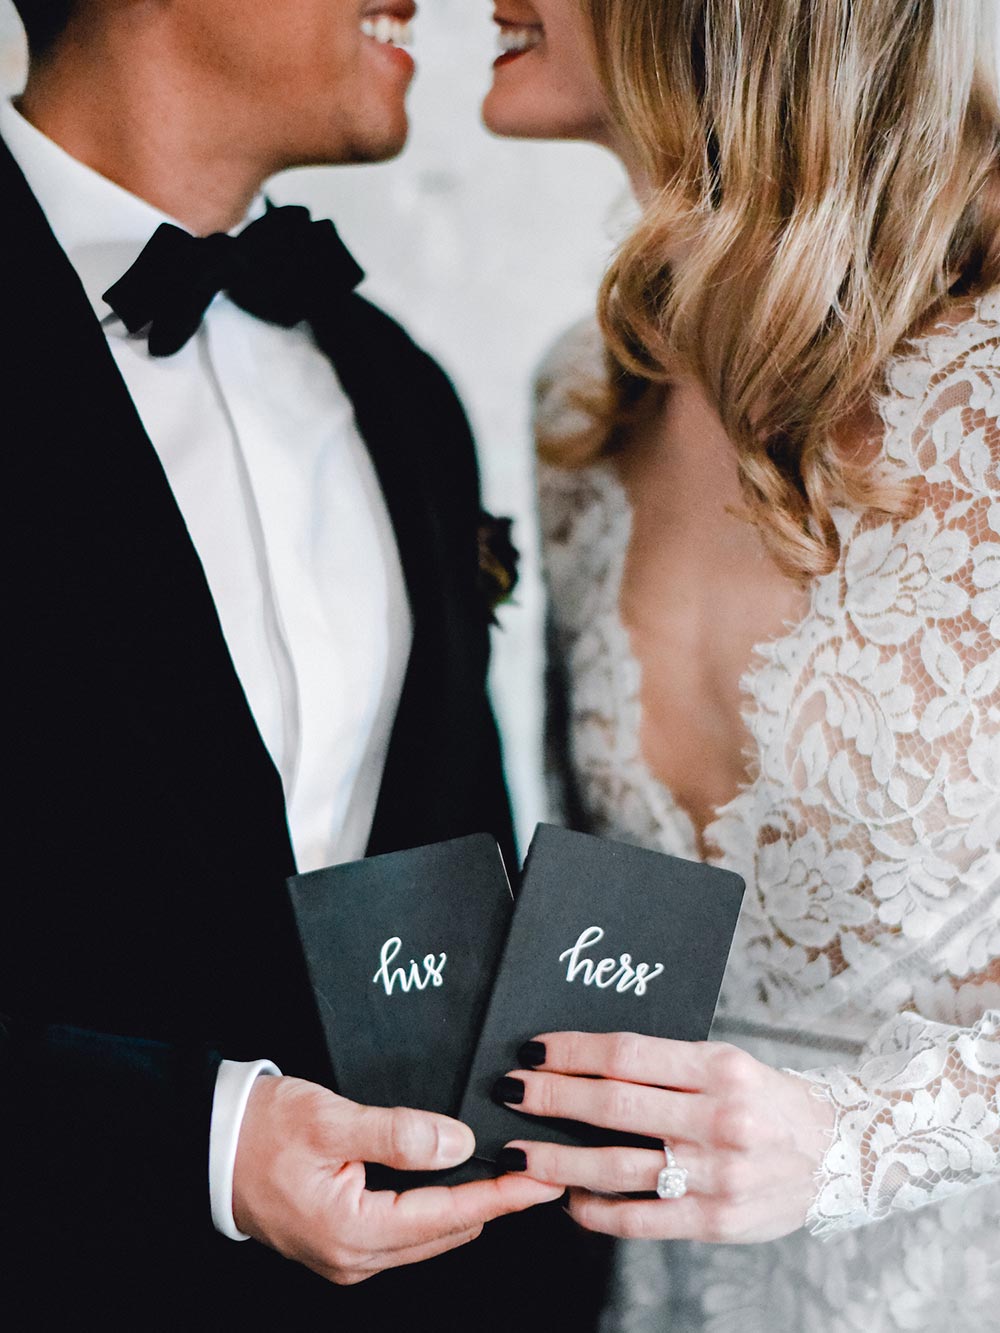 Black Tie Wedding Inspiration with a Show-stopping Nod to Adele ⋆ Ruffled